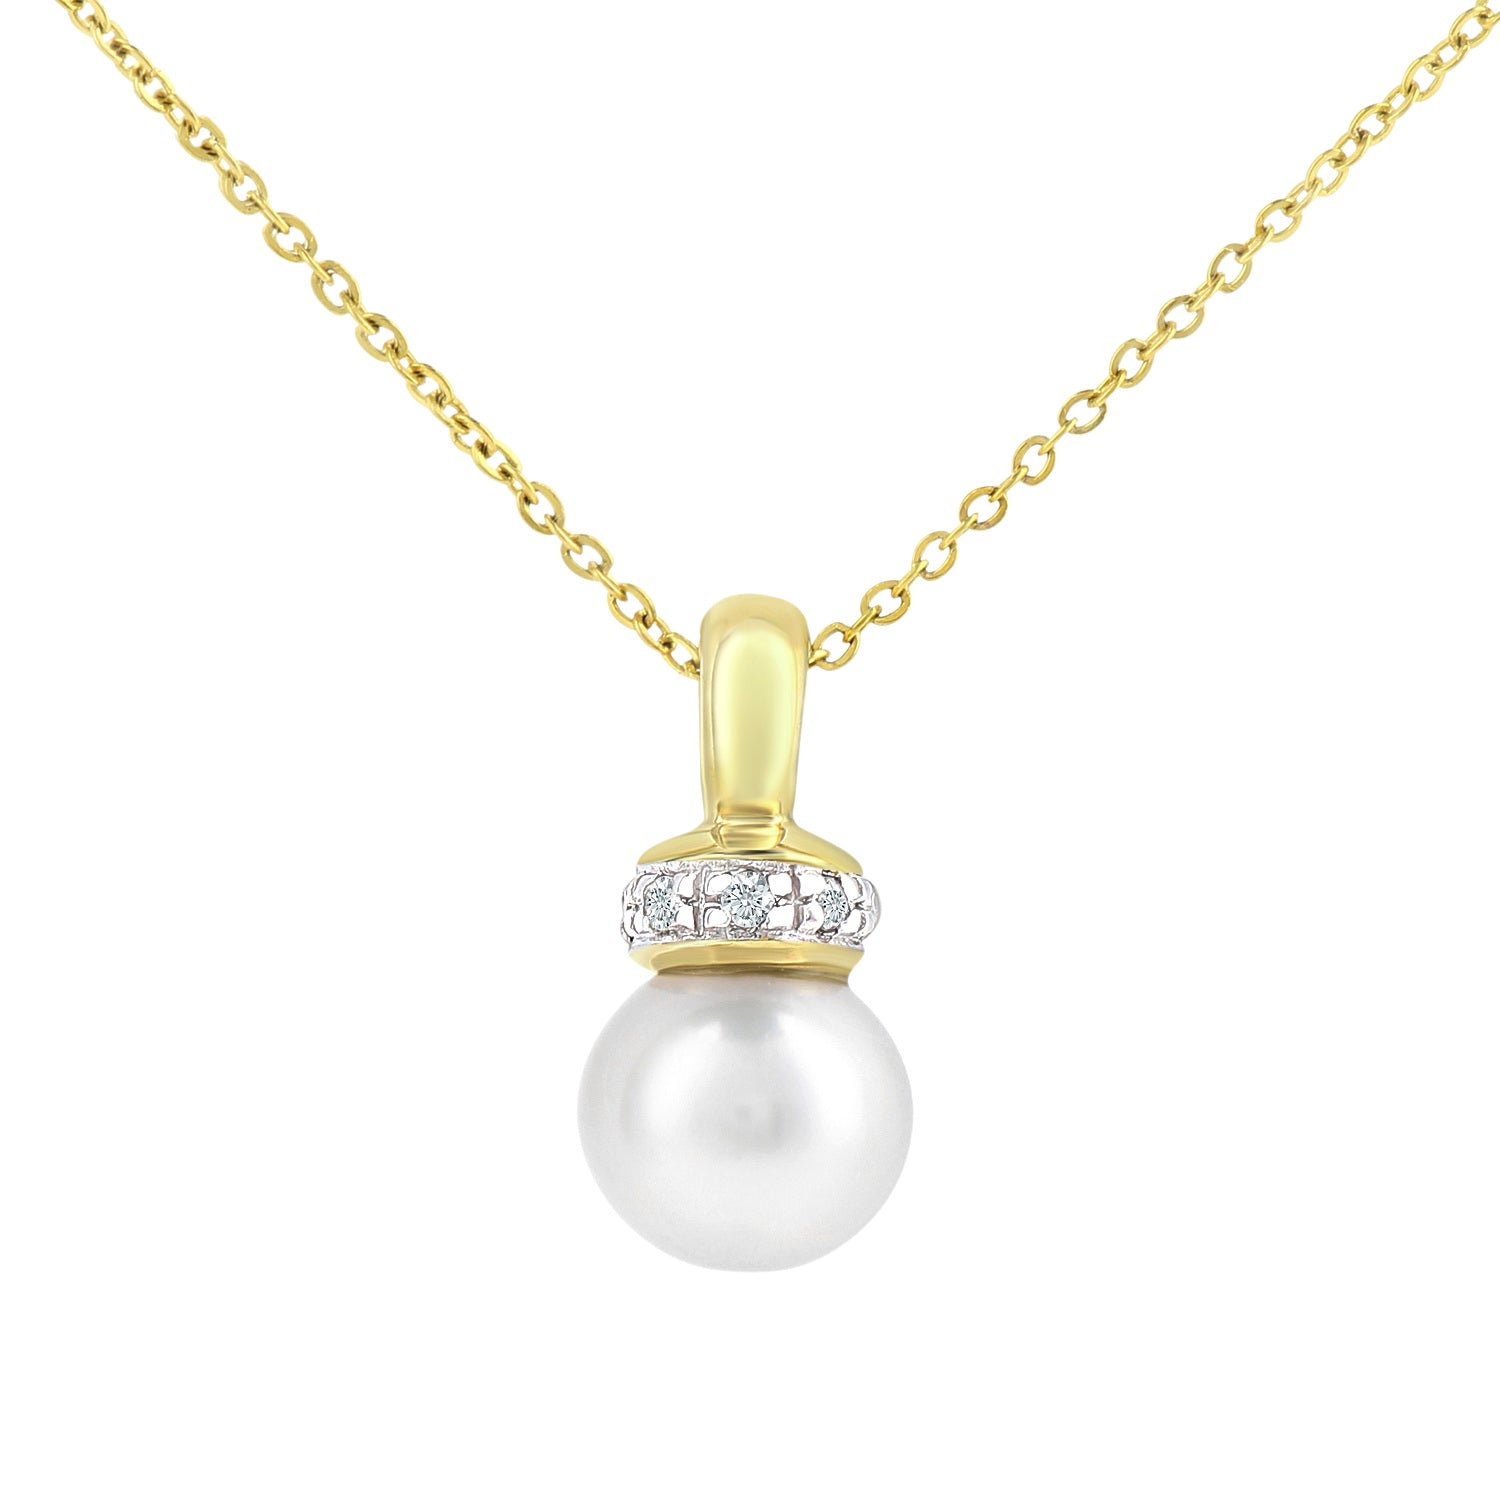 9ct Gold  Diamond Pearl 6.5mm Pacifier Dummy Charm Necklace 18" - PP0AXL4352YPRL